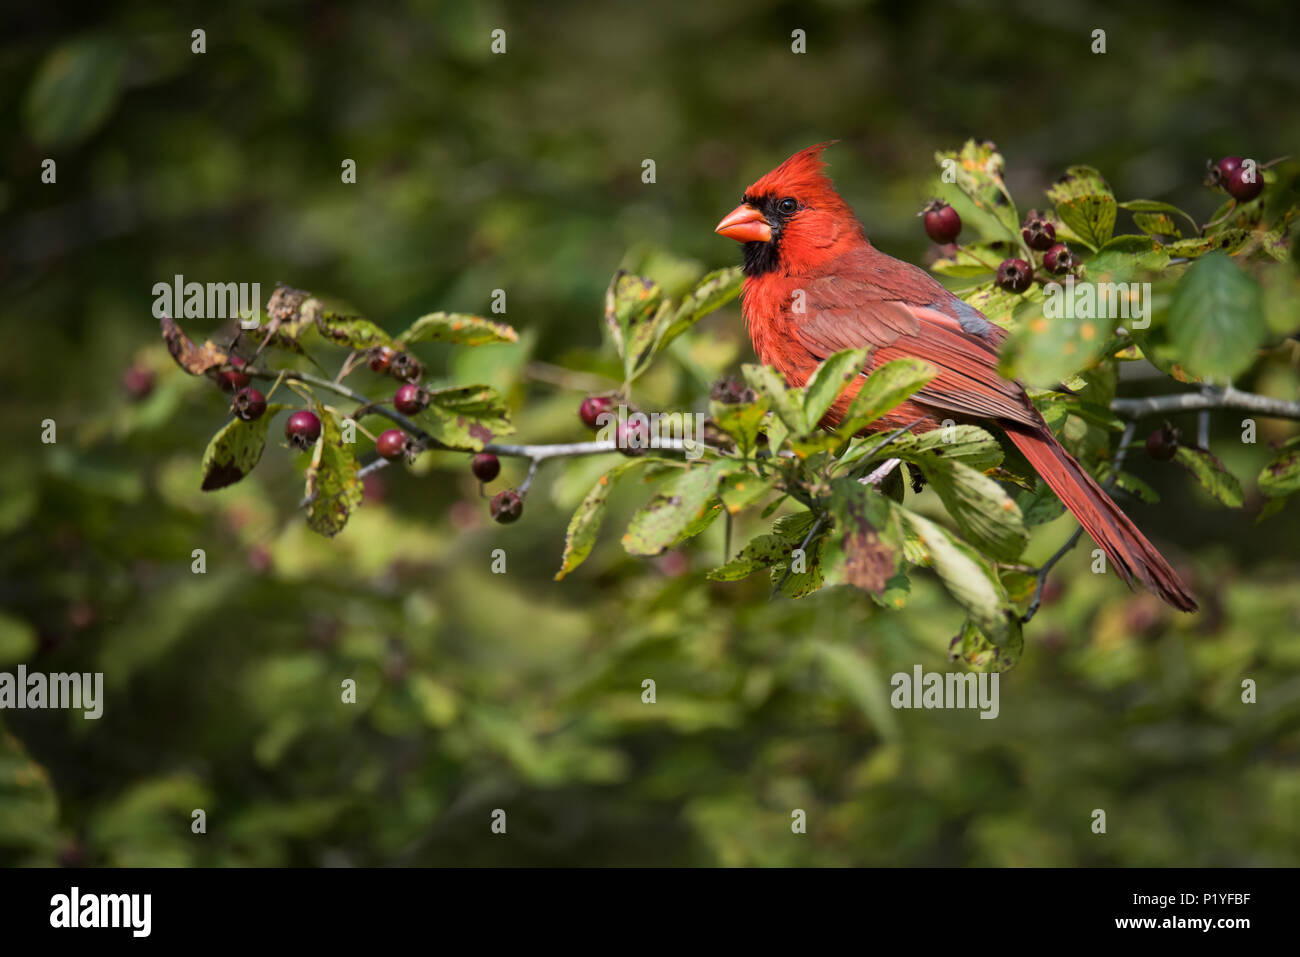 A Northern Cardinal poses on a berry-filled leaf at Ashbridges Bay Park, Toronto. Stock Photo